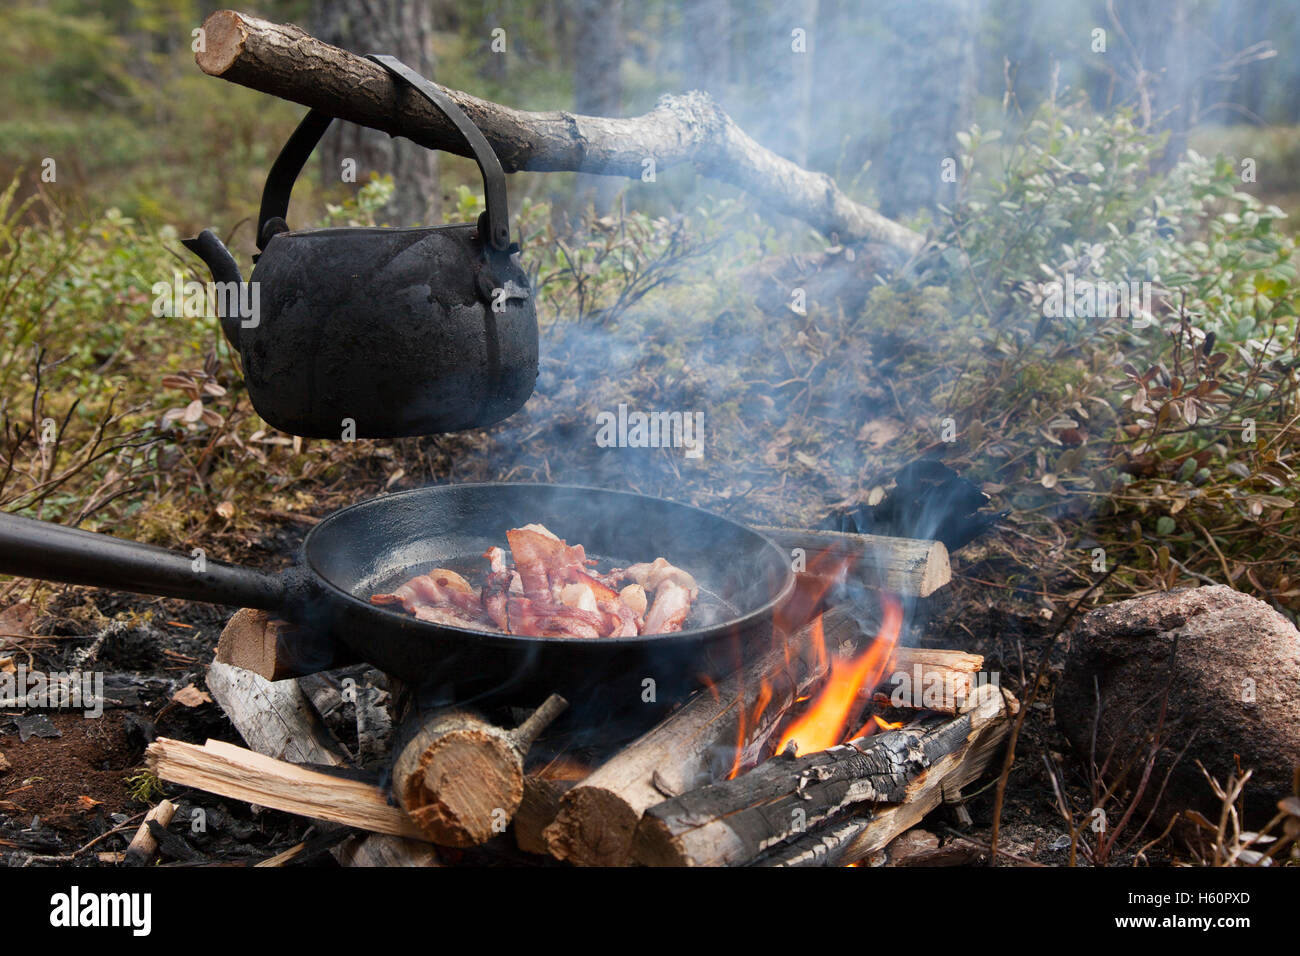 Blackened tin kettle boiling water and pan cooking bacon over flames from campfire during hike in forest Stock Photo